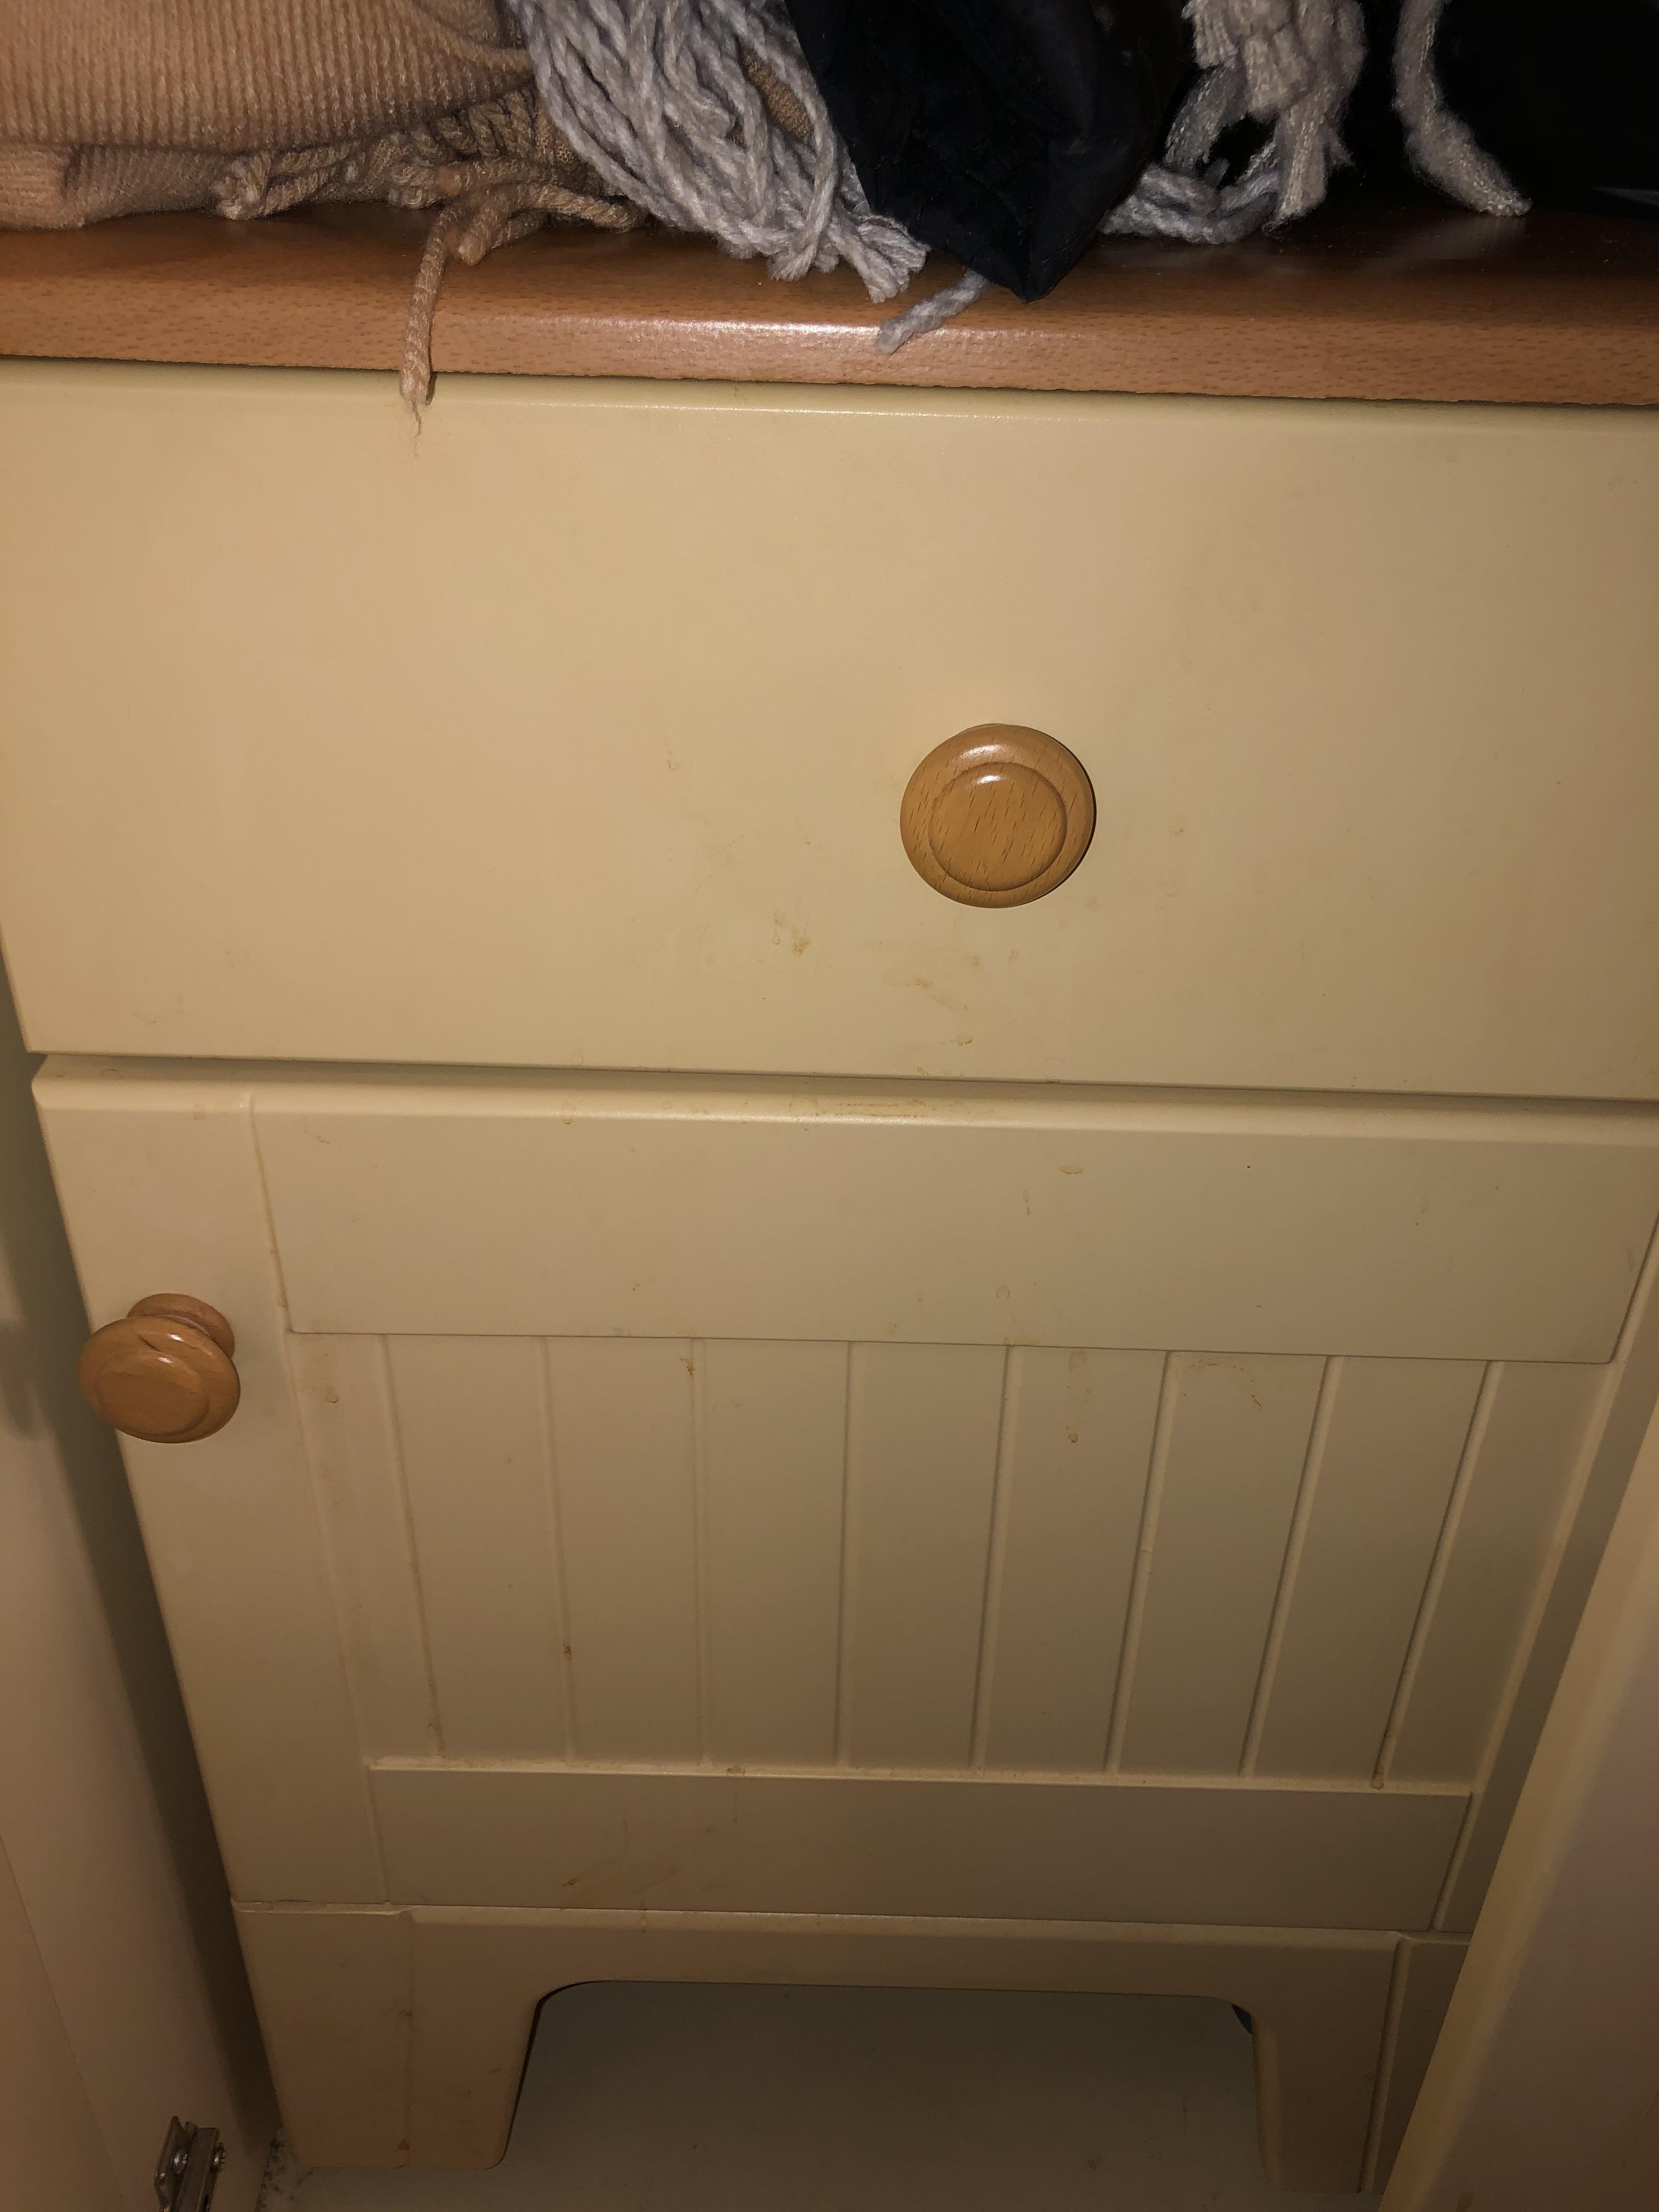 CREAM PANEL TWO DOOR WARDROBE AND MATCHING BEDSIDE CUPBOARD WITH DRAWER - Image 3 of 3